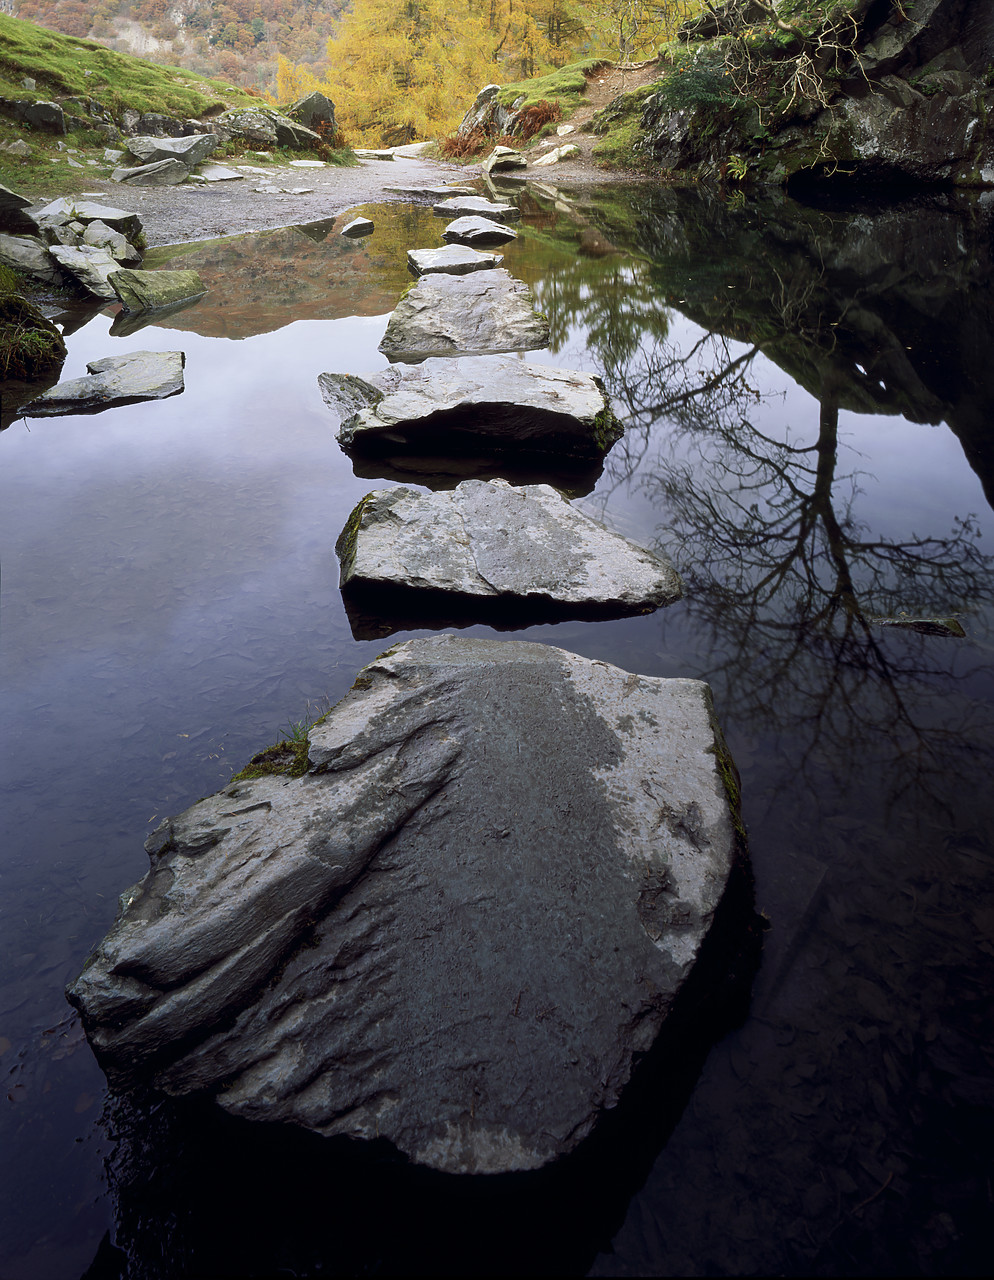 #040259-2 - Stepping Stones in Rydal Cave, Lake District National Park, Cumbria, England